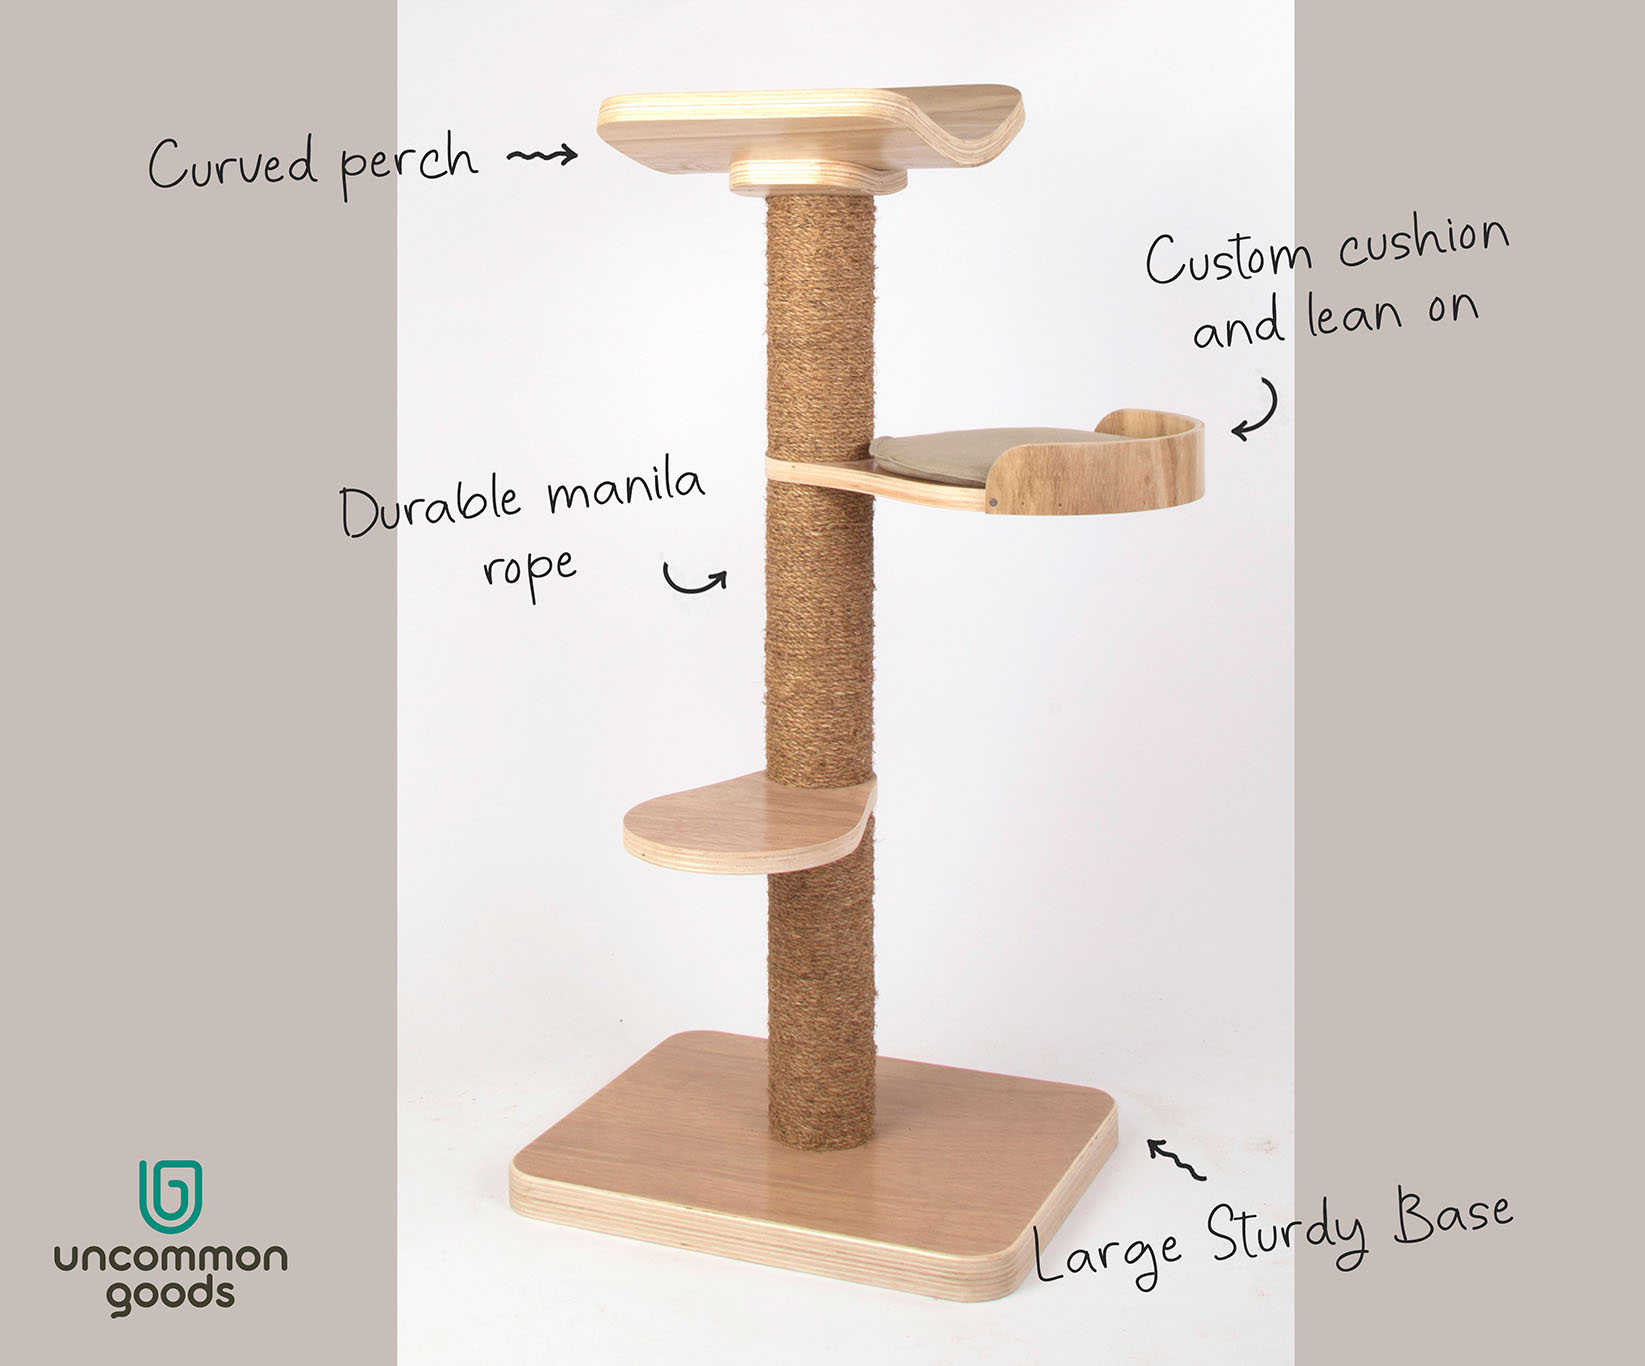 Uncommon Goods Singapore makes a tall and durable cat tree for 2 singapore specials